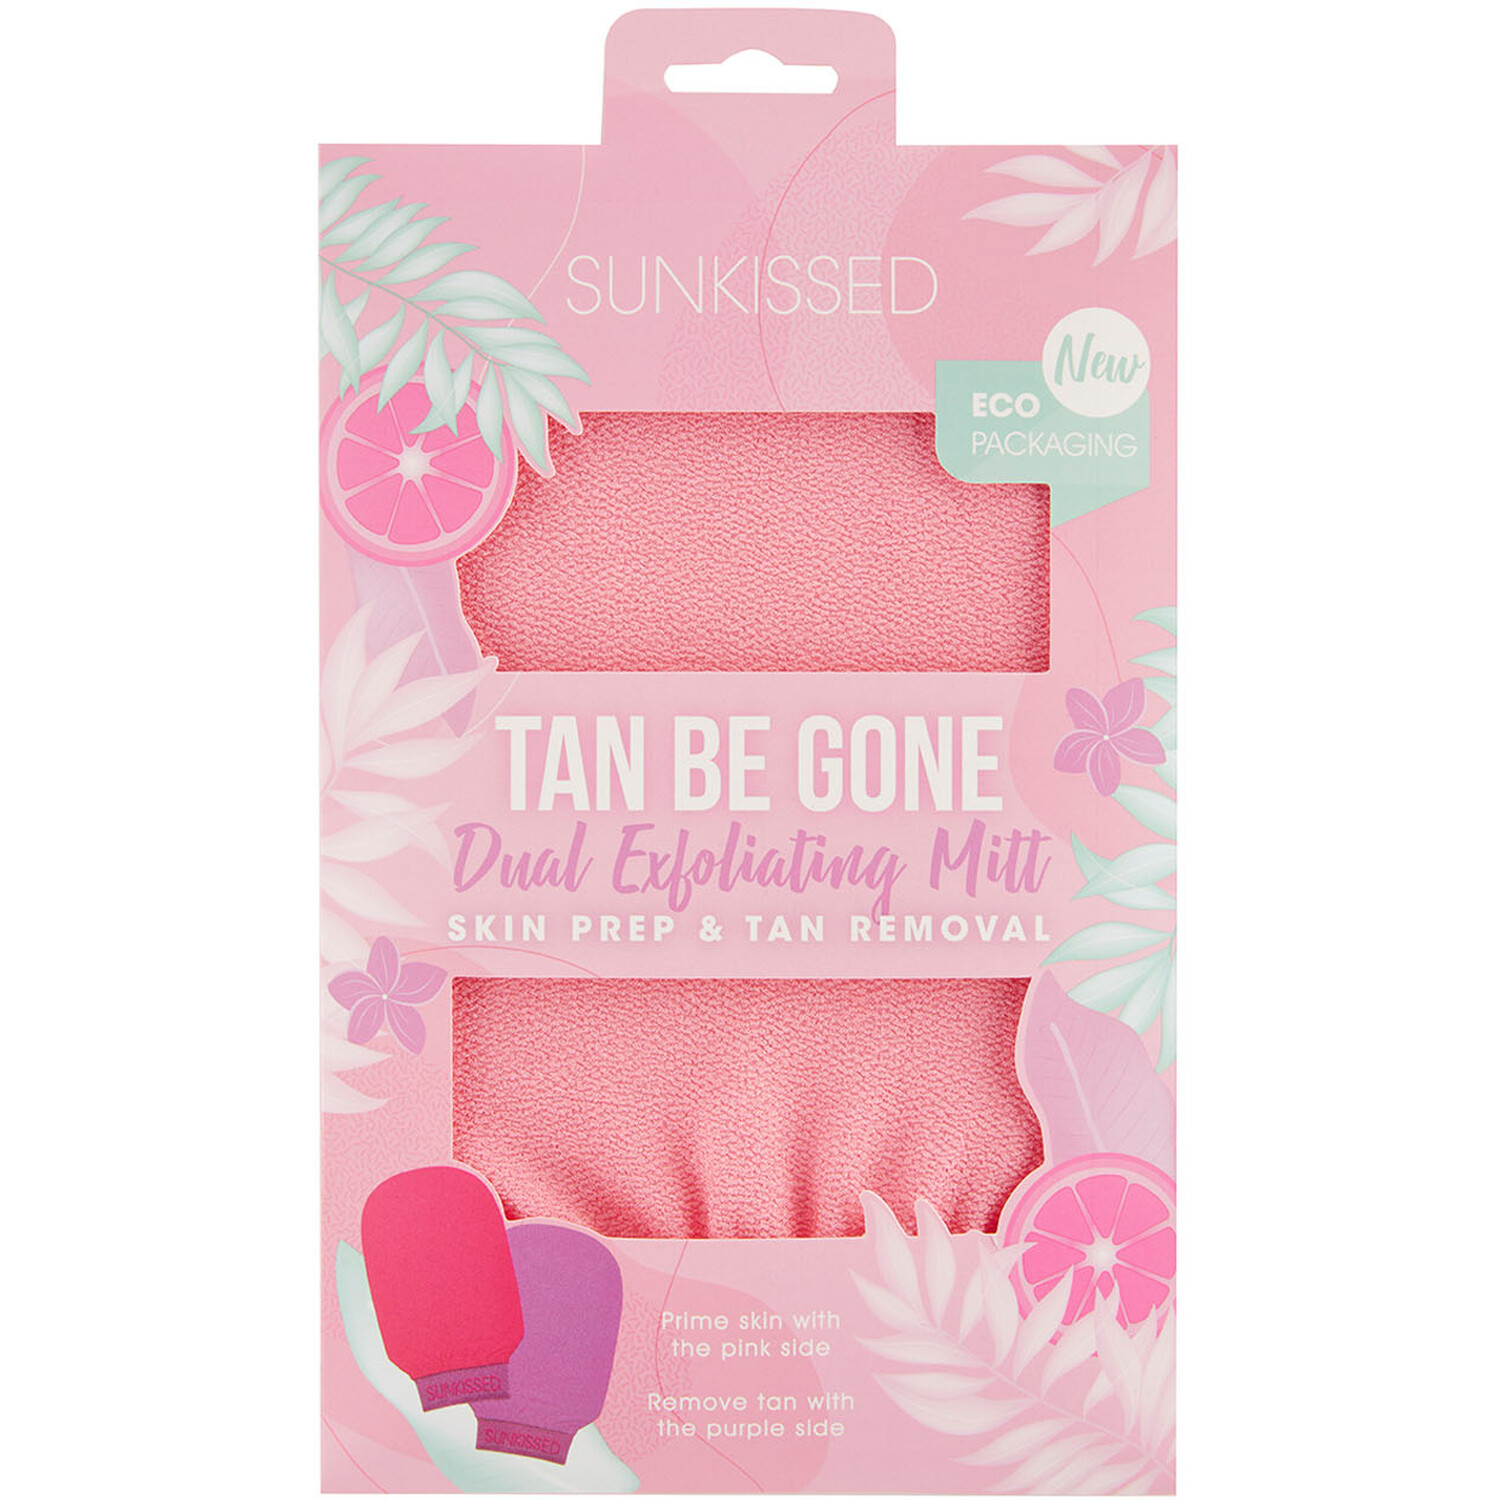 Sunkissed Tan Be Gone Dual Exfoliating Mitt Image